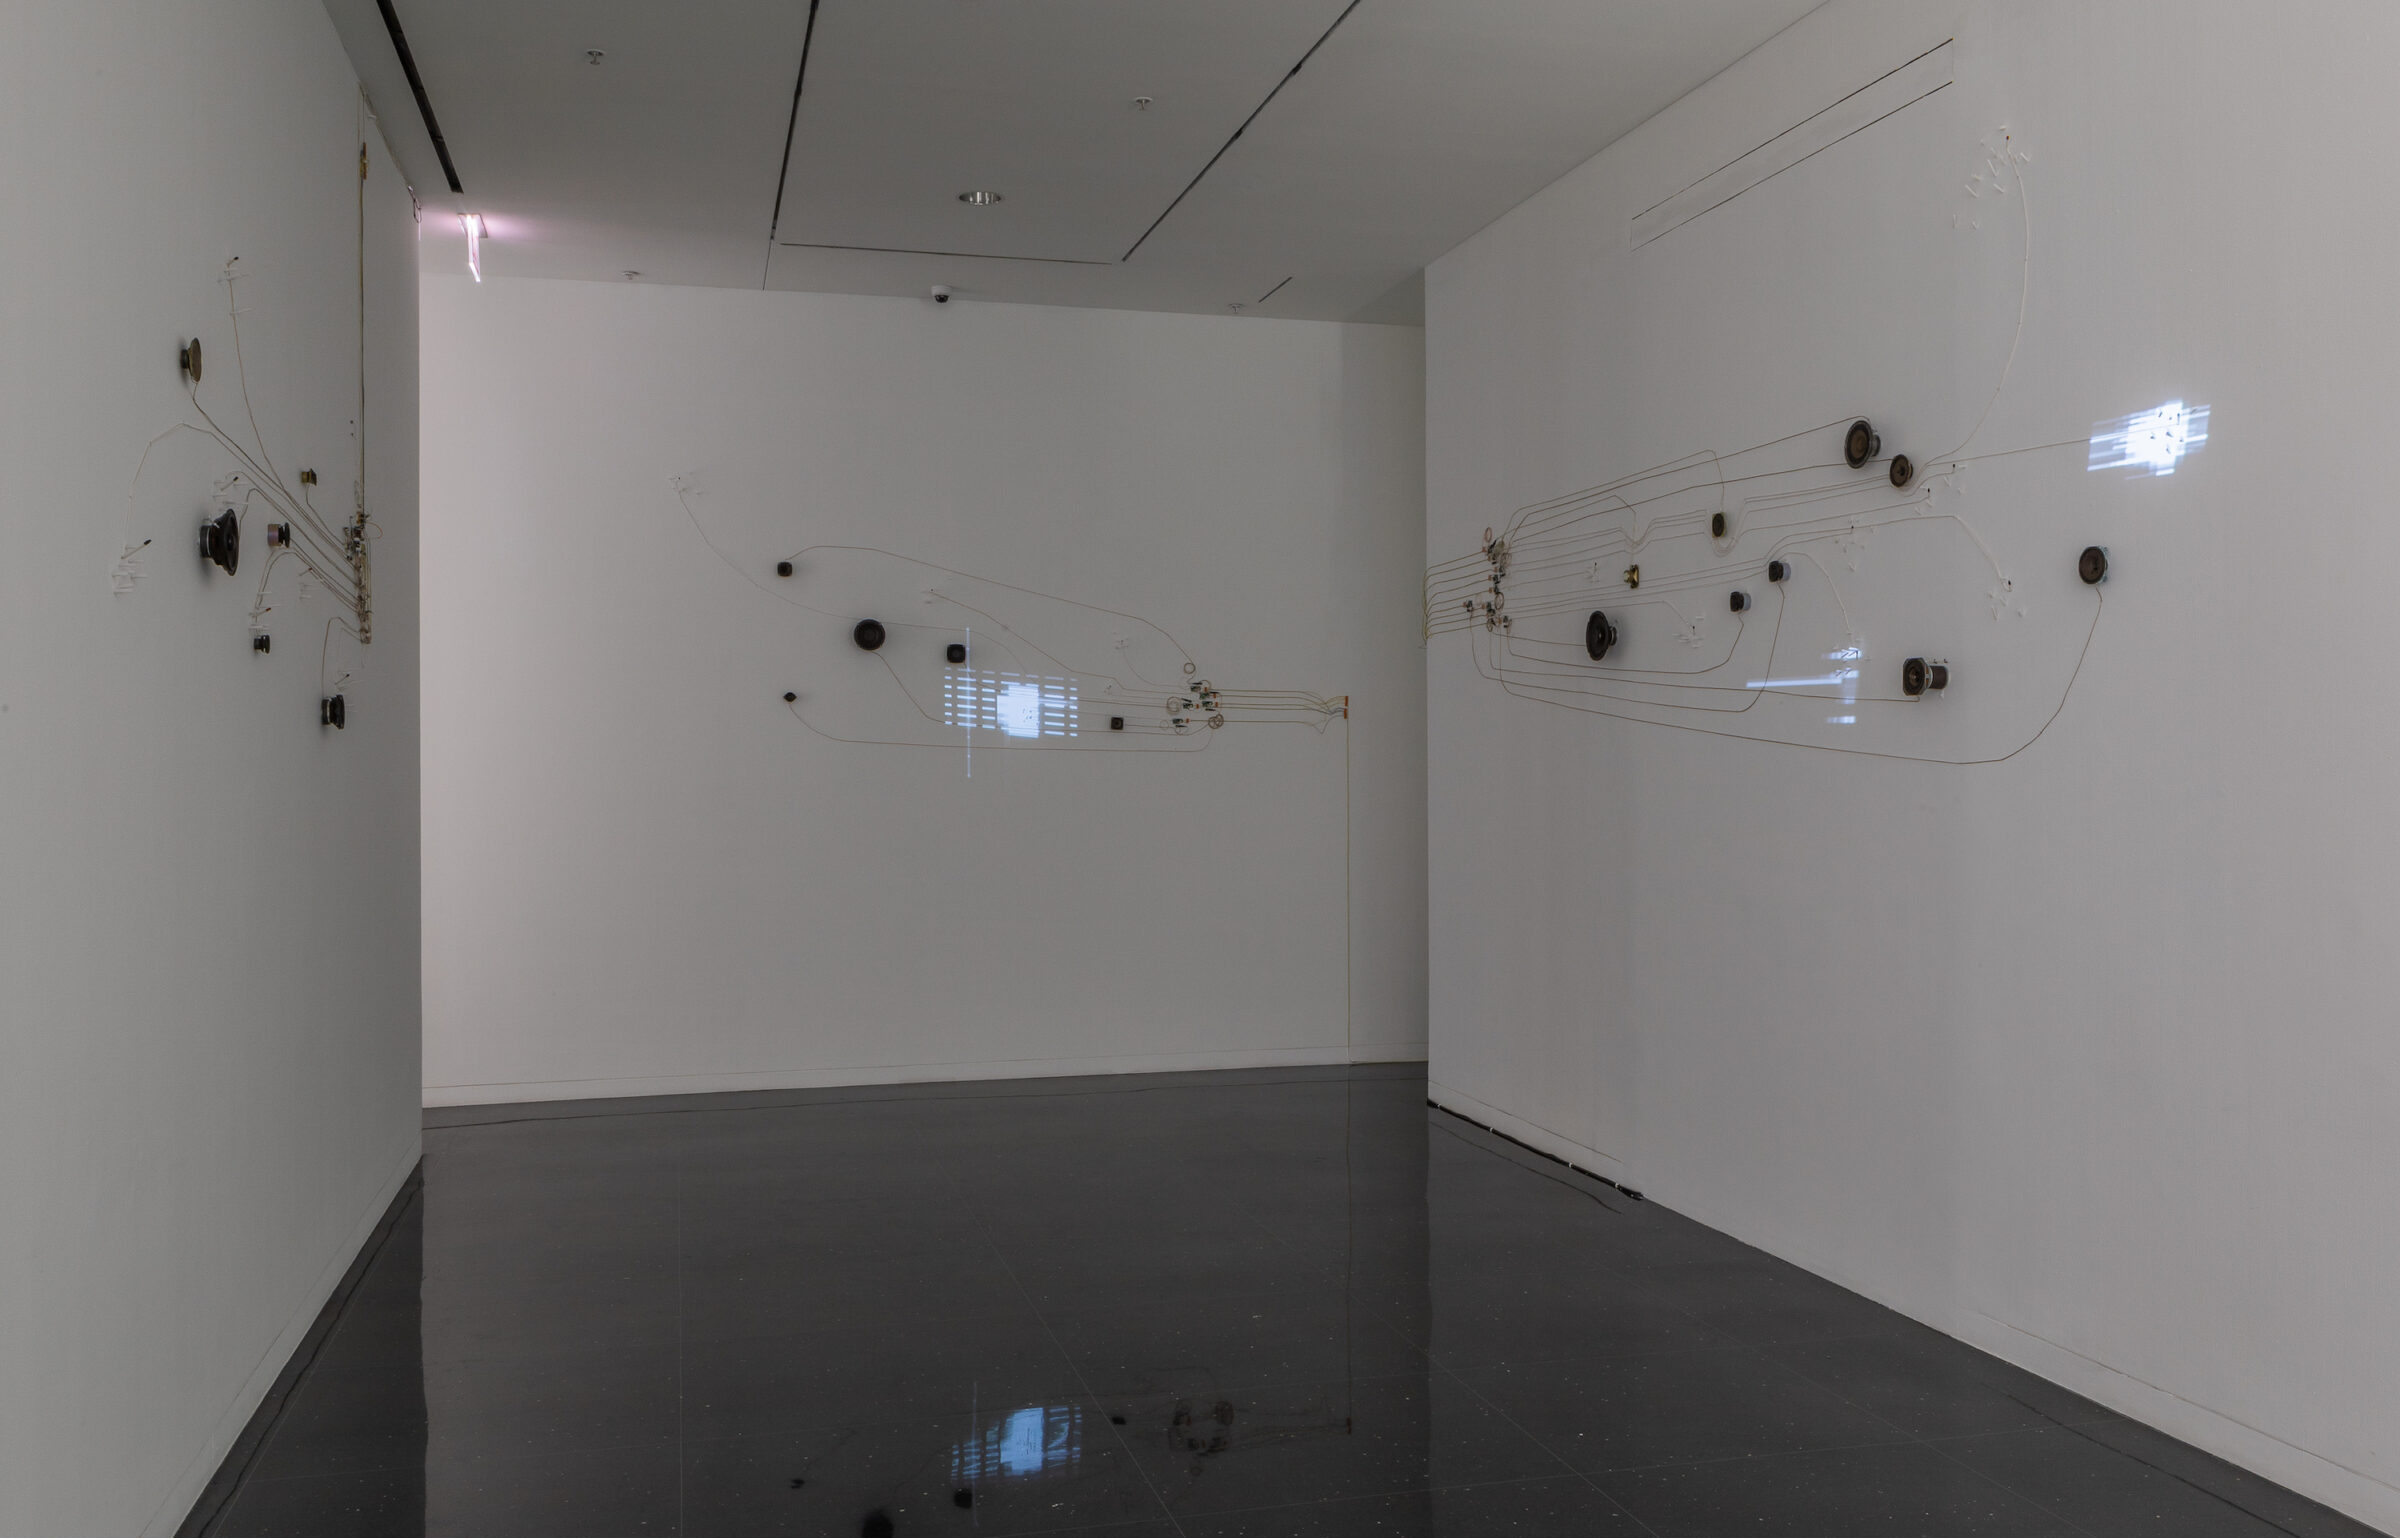 A series of speakers, nodes and wires installed on gallery walls.